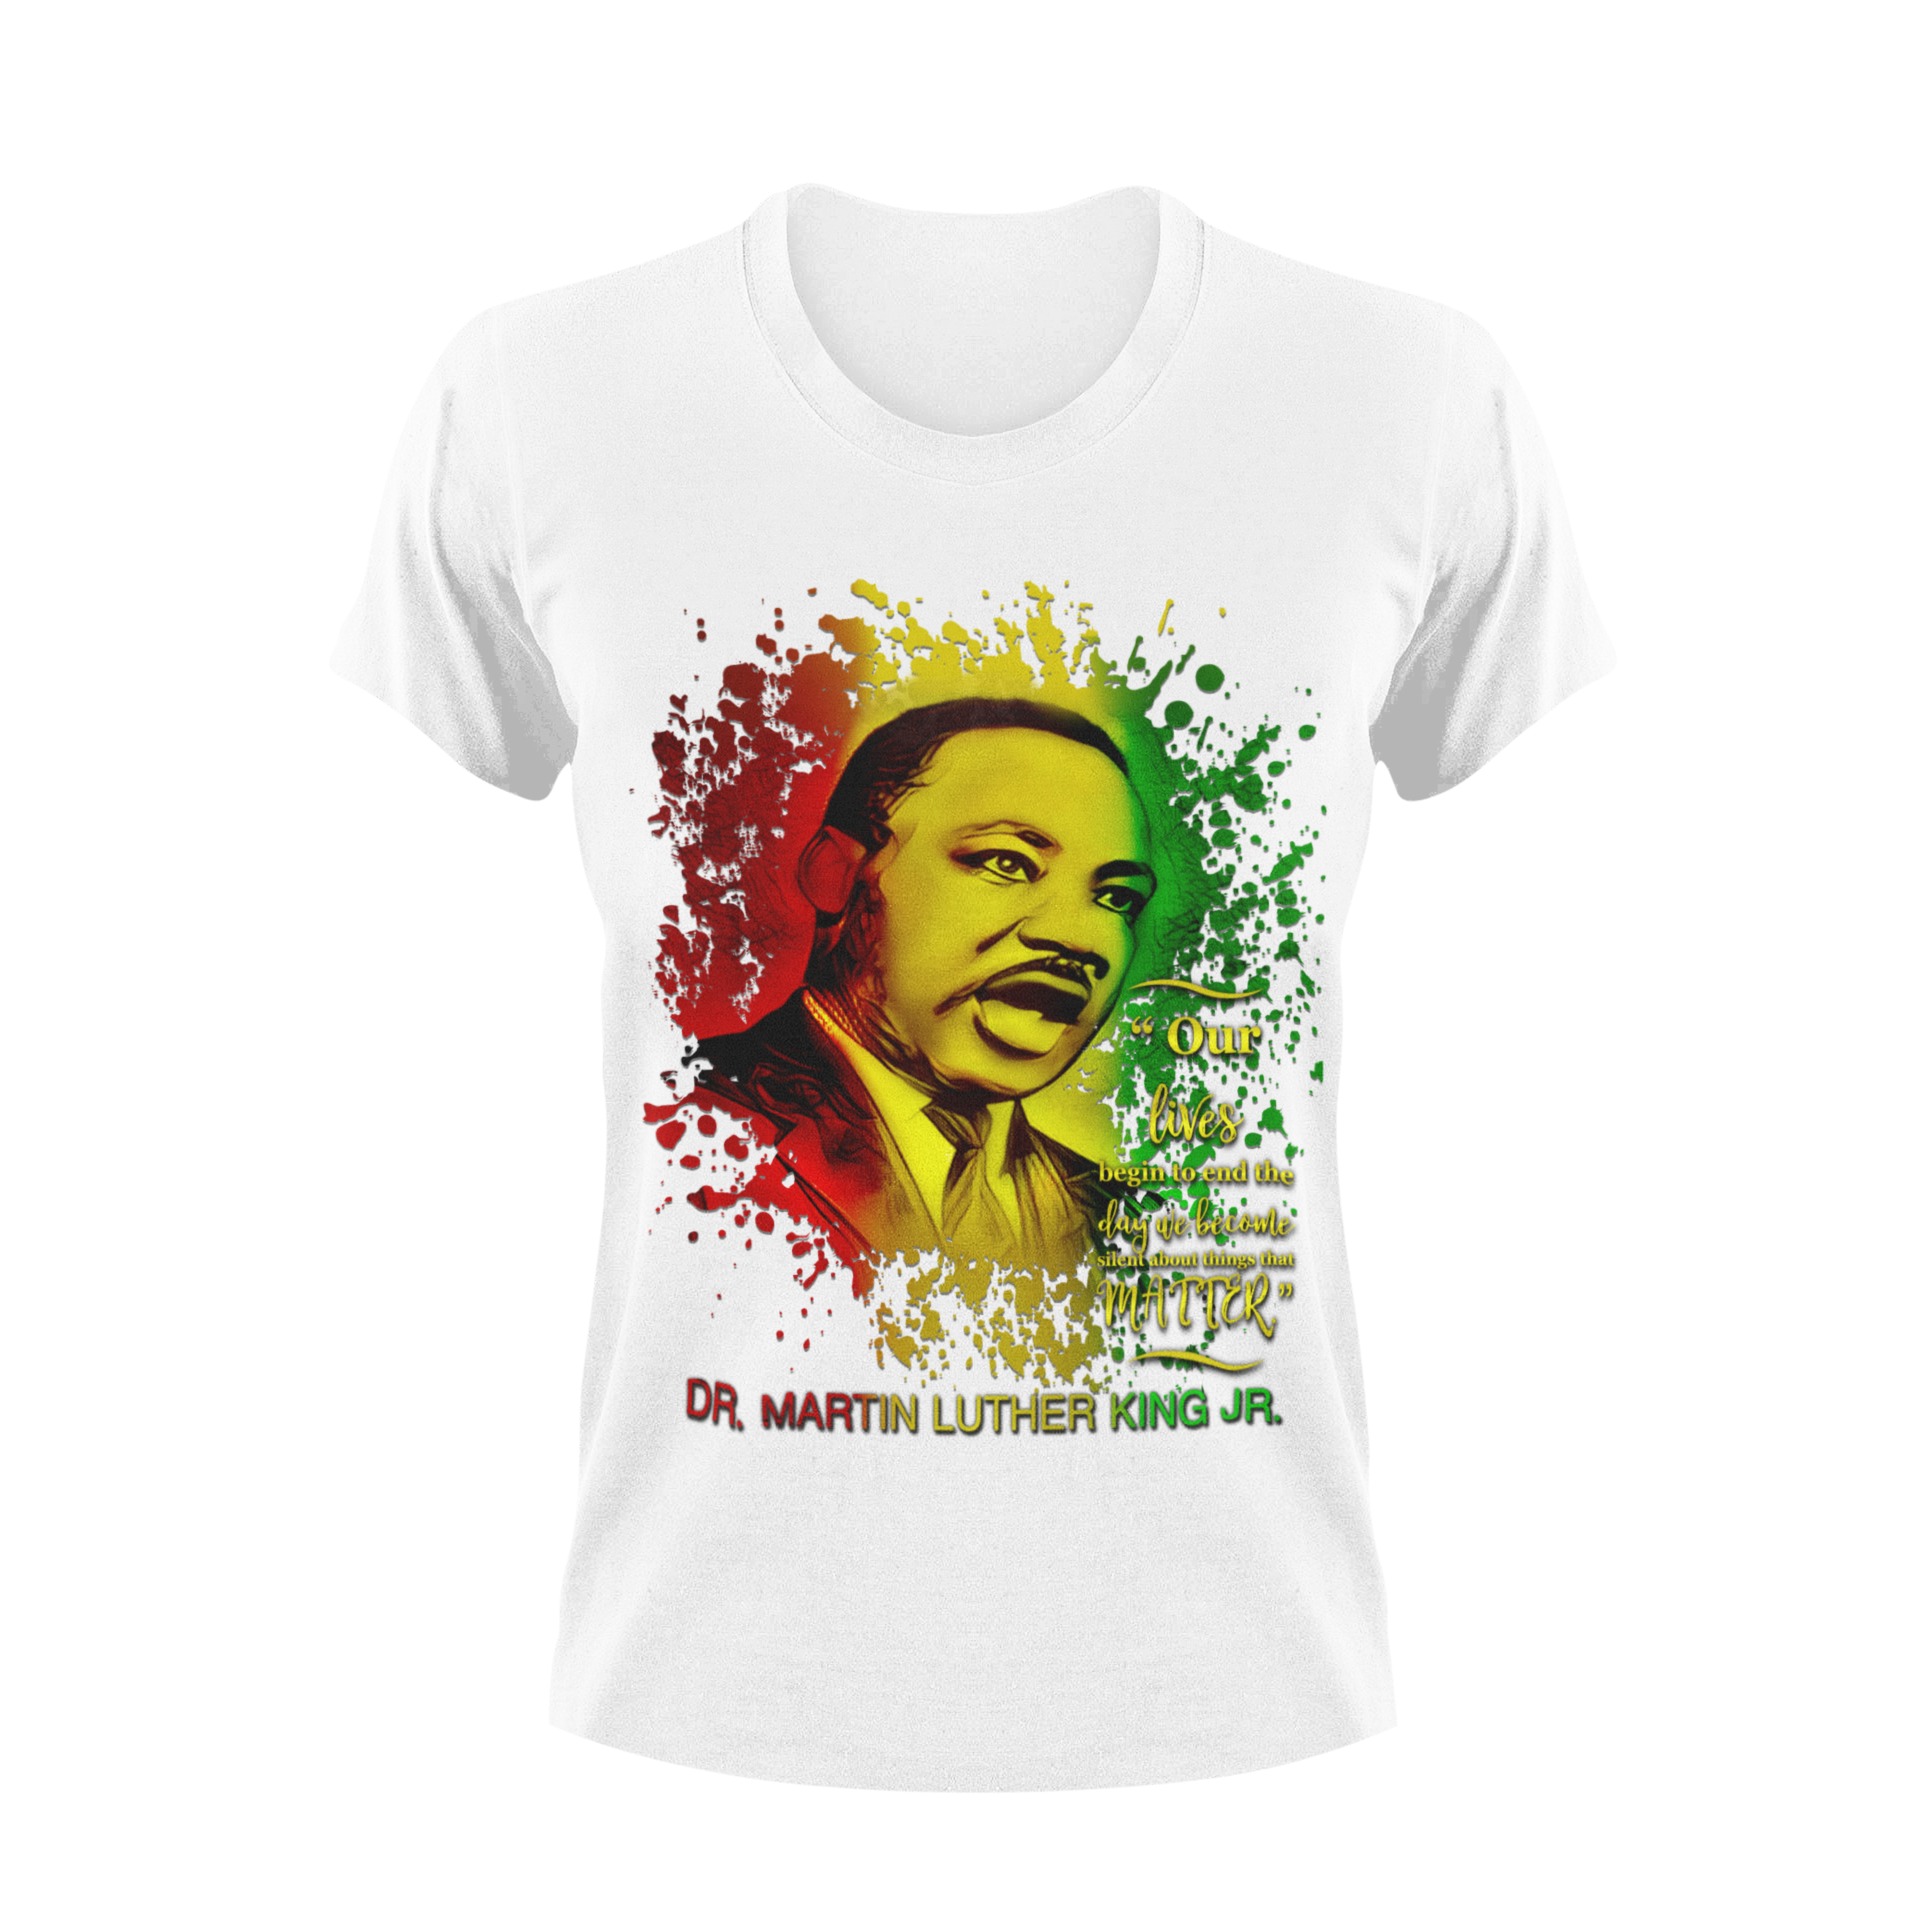 Dr. Martin Luther King Jr. Tee